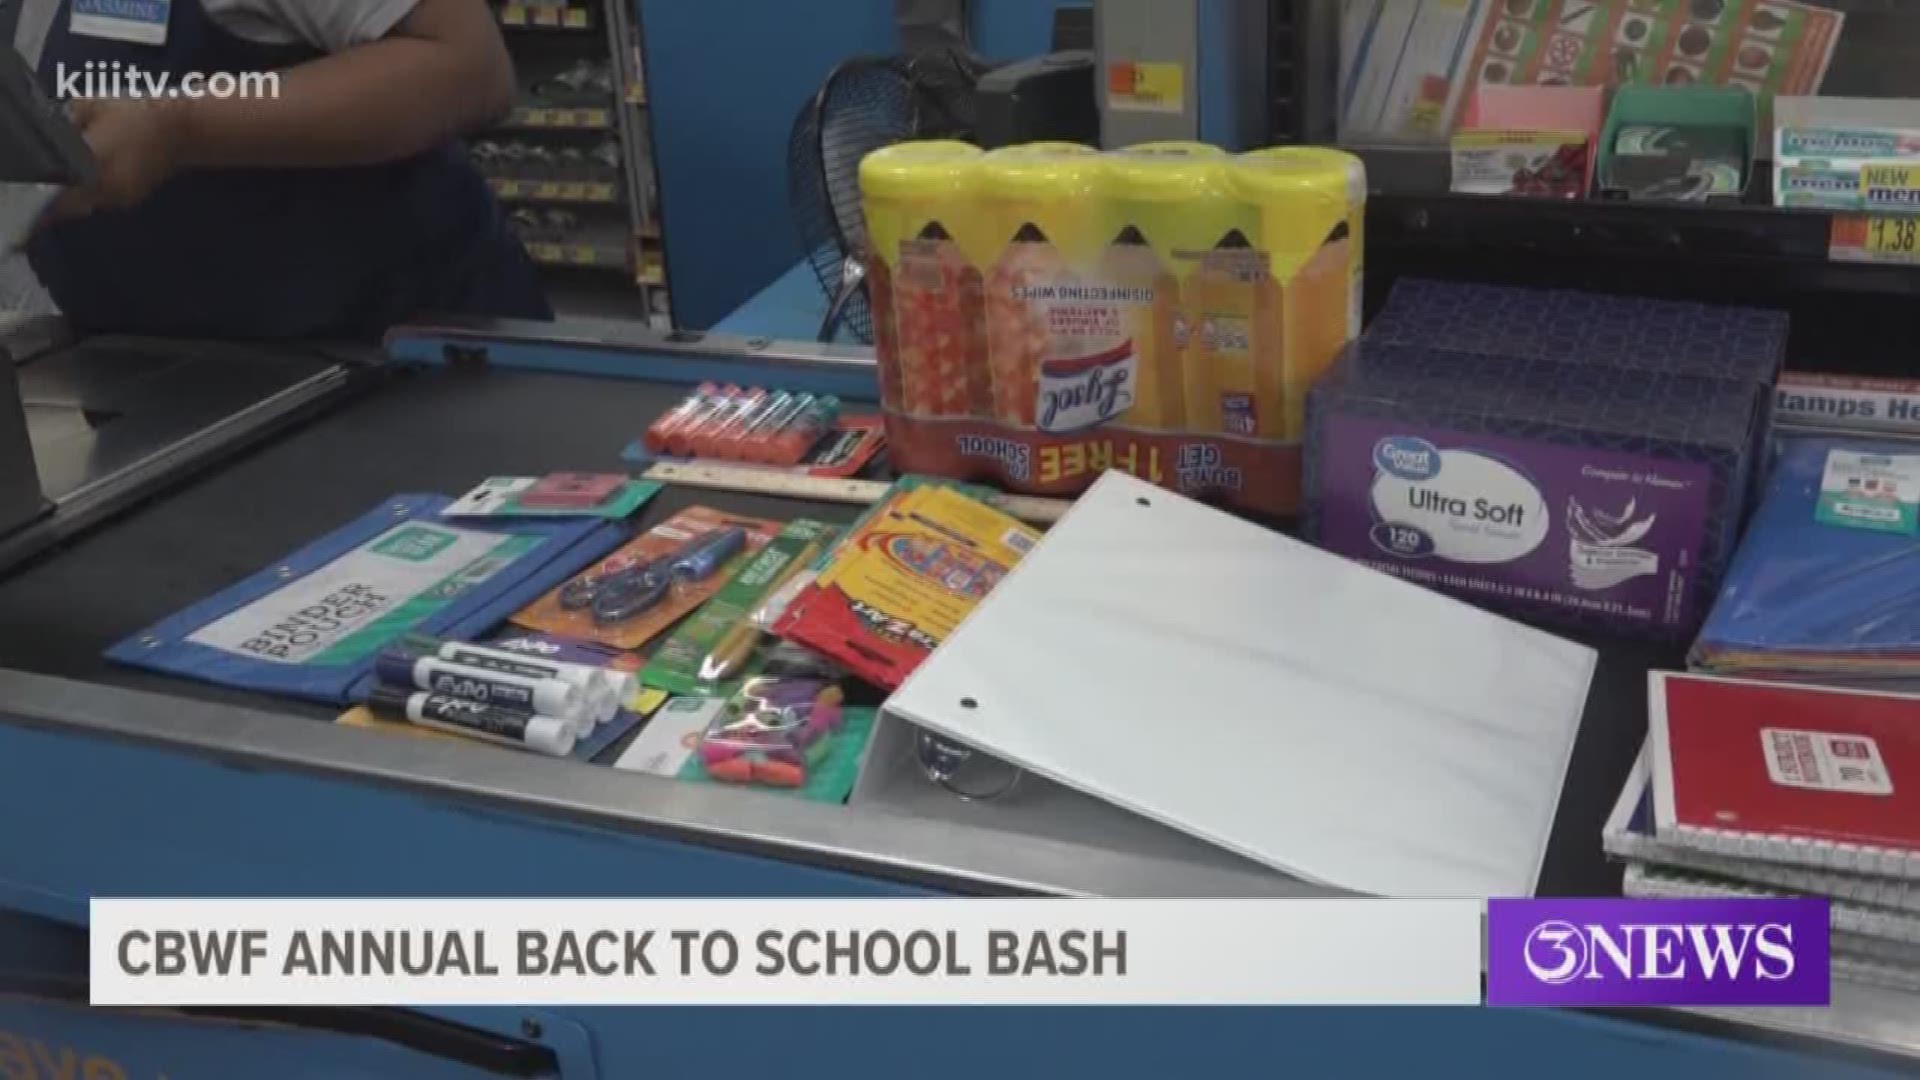 The Coastal Bend Wellness Foundation is getting students back-to-school ready in a fun way for the whole family.